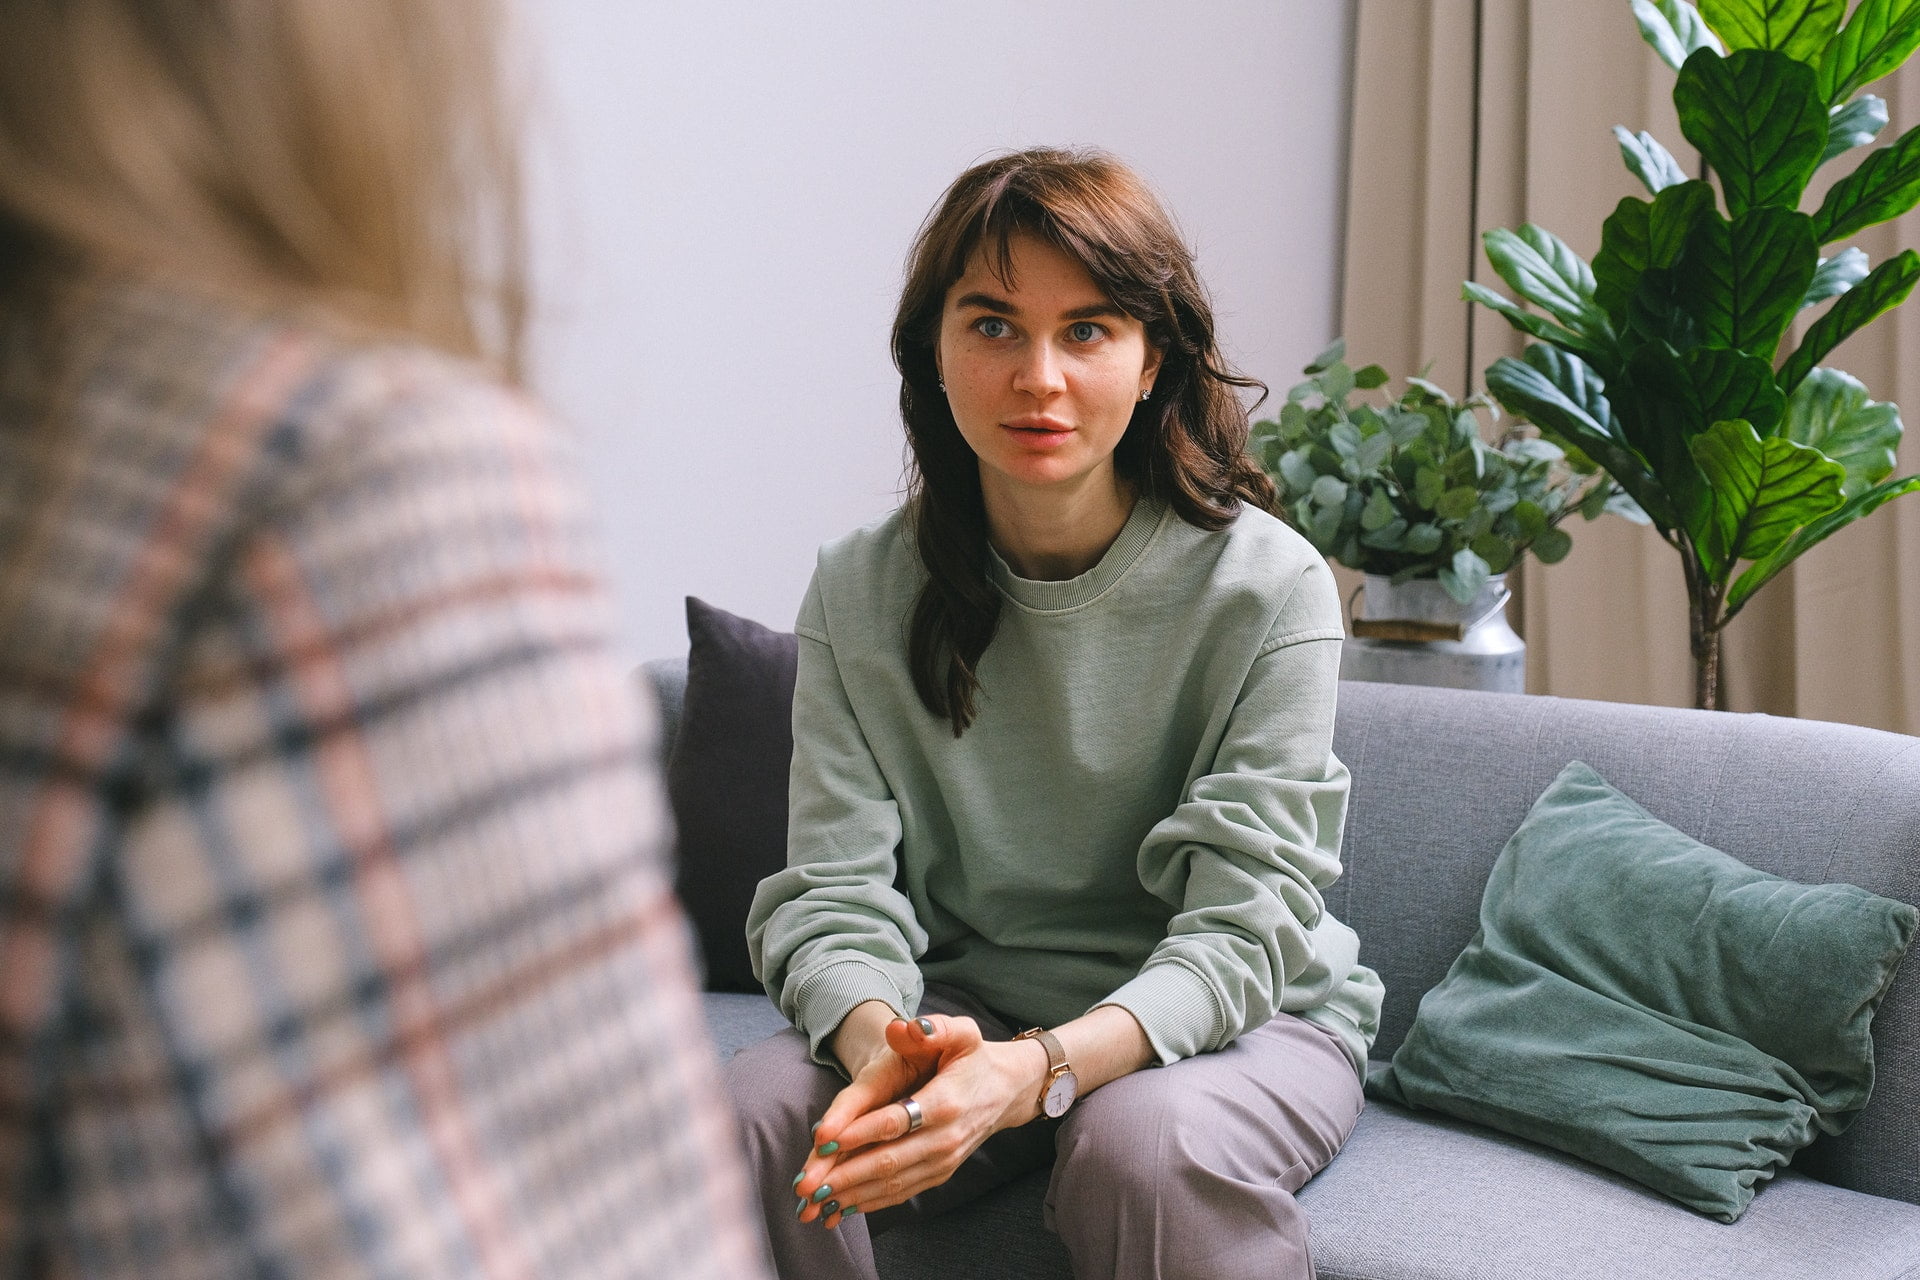 Young woman sitting on a sofa talking to a support worker.